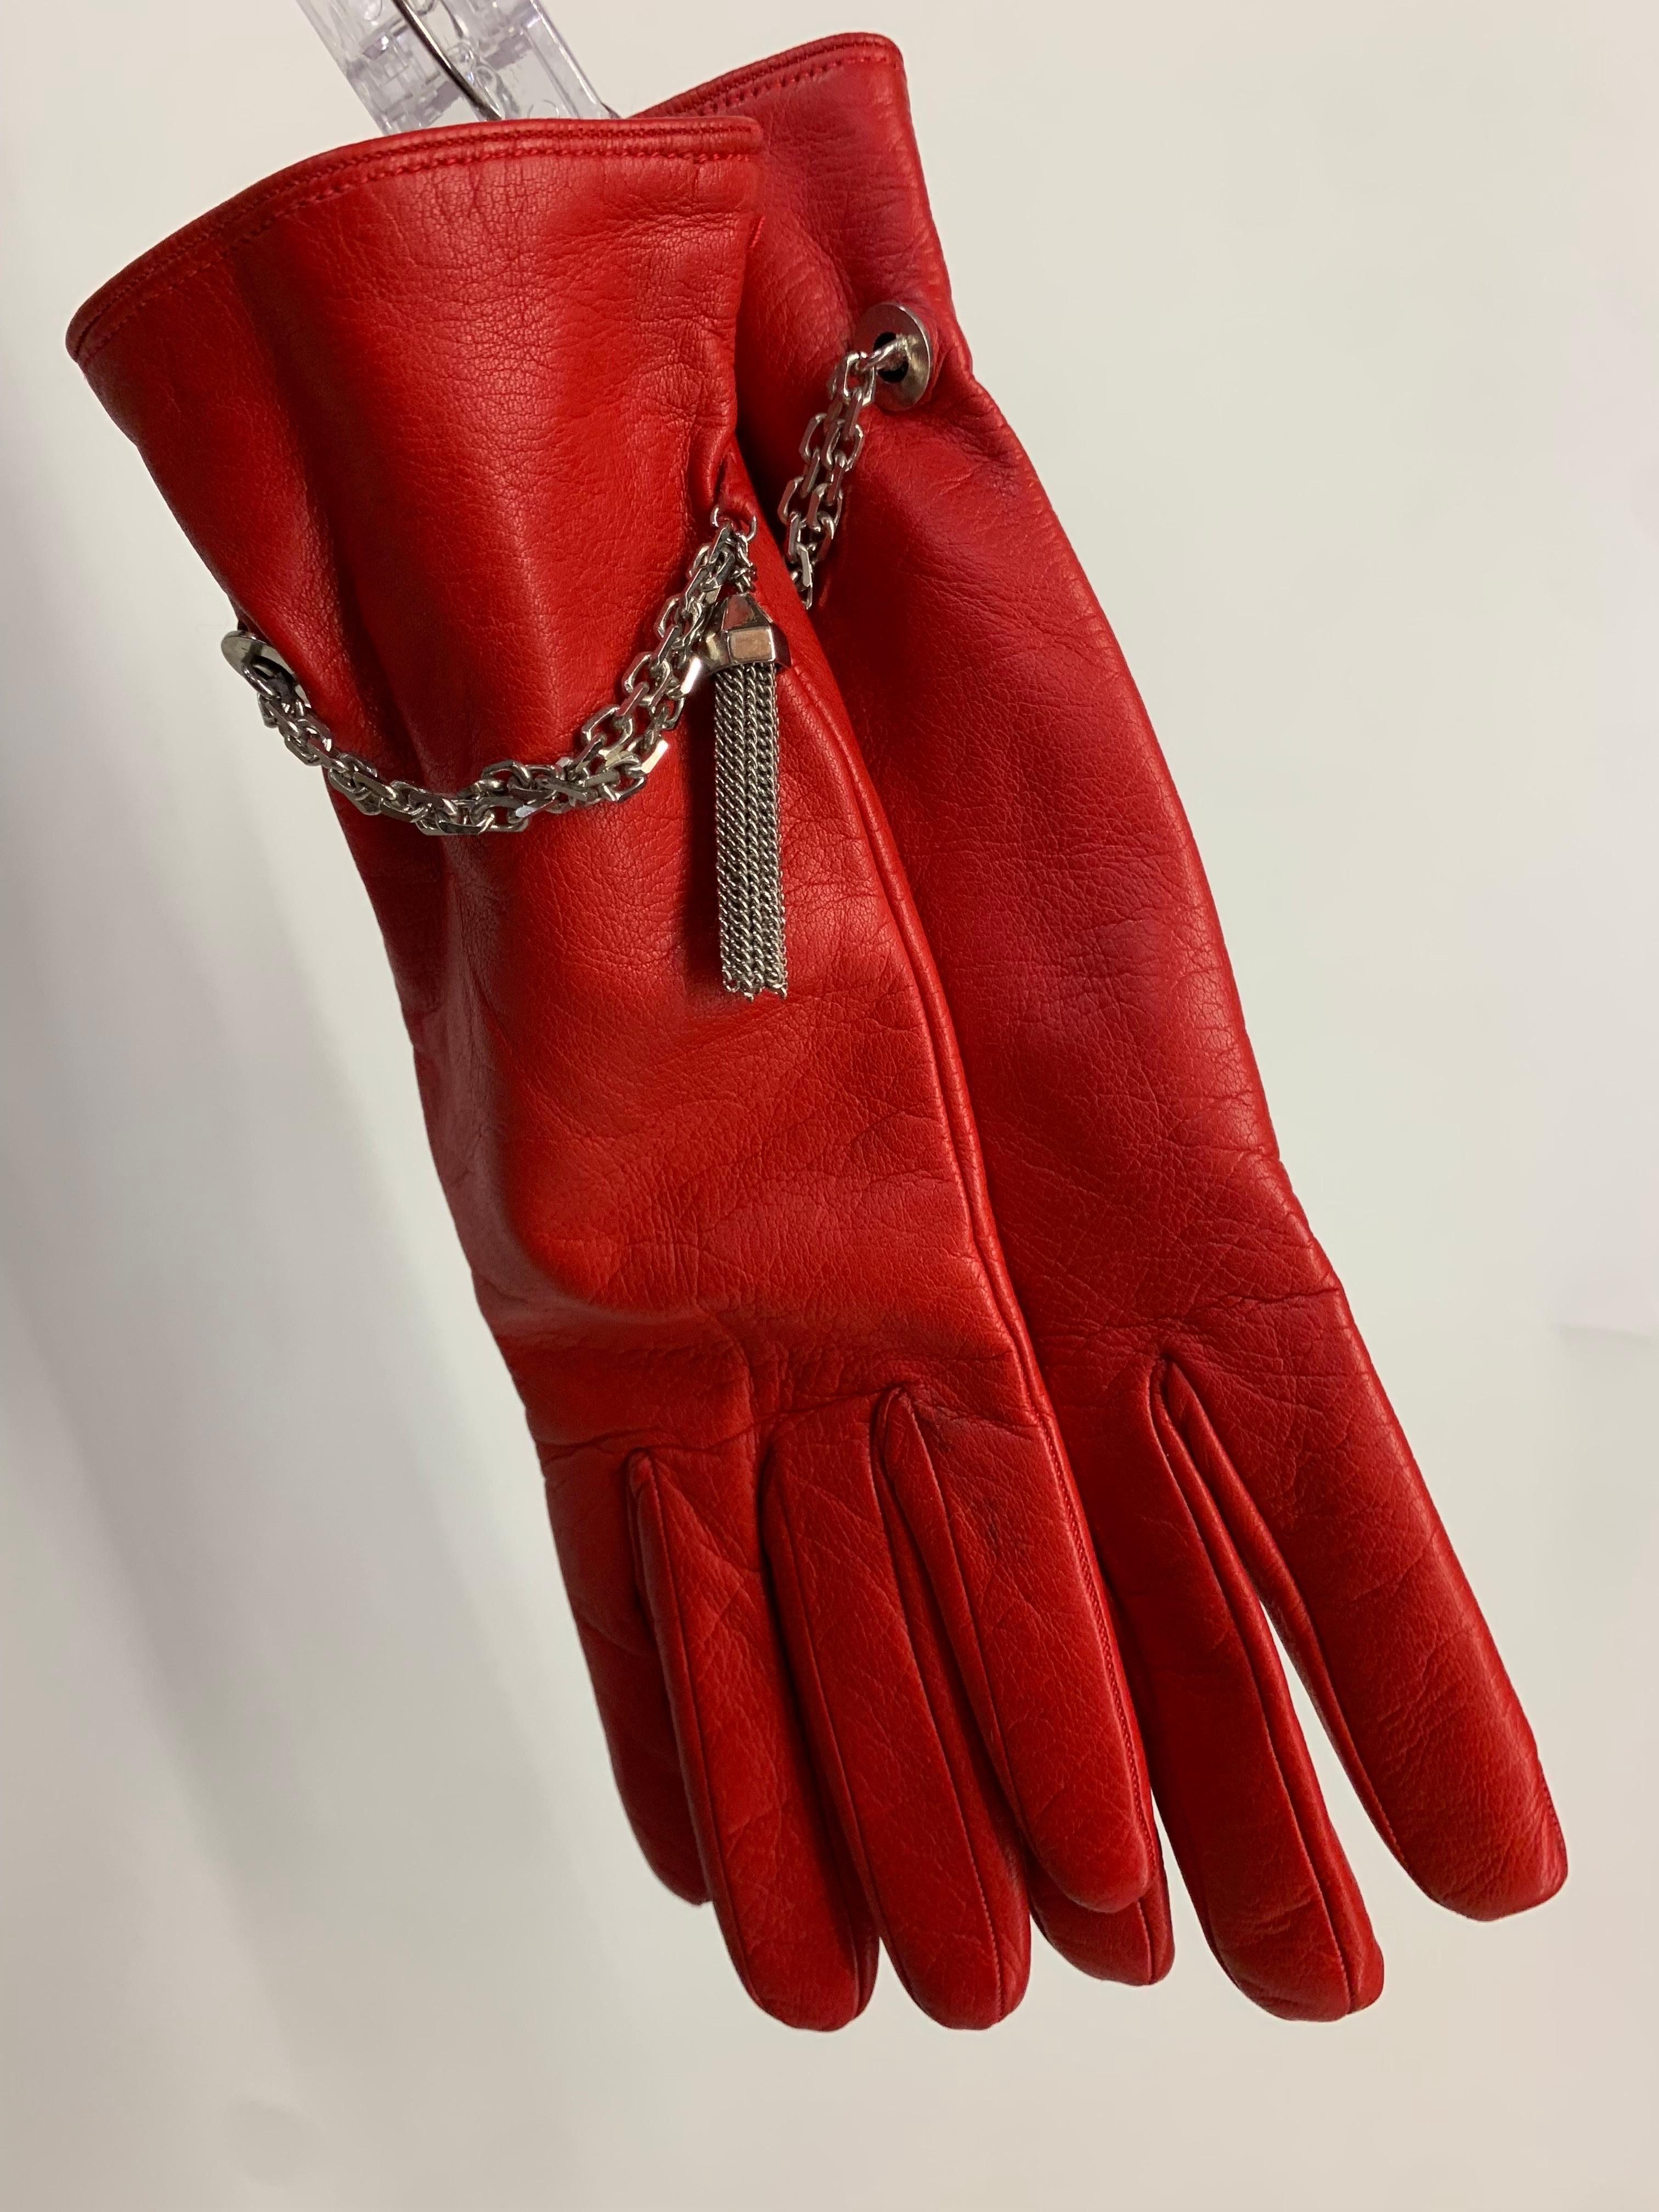 1980s Gianni Versace Red Kid Leather Gloves w Cashmere Lining & Tassel Chain  For Sale 7